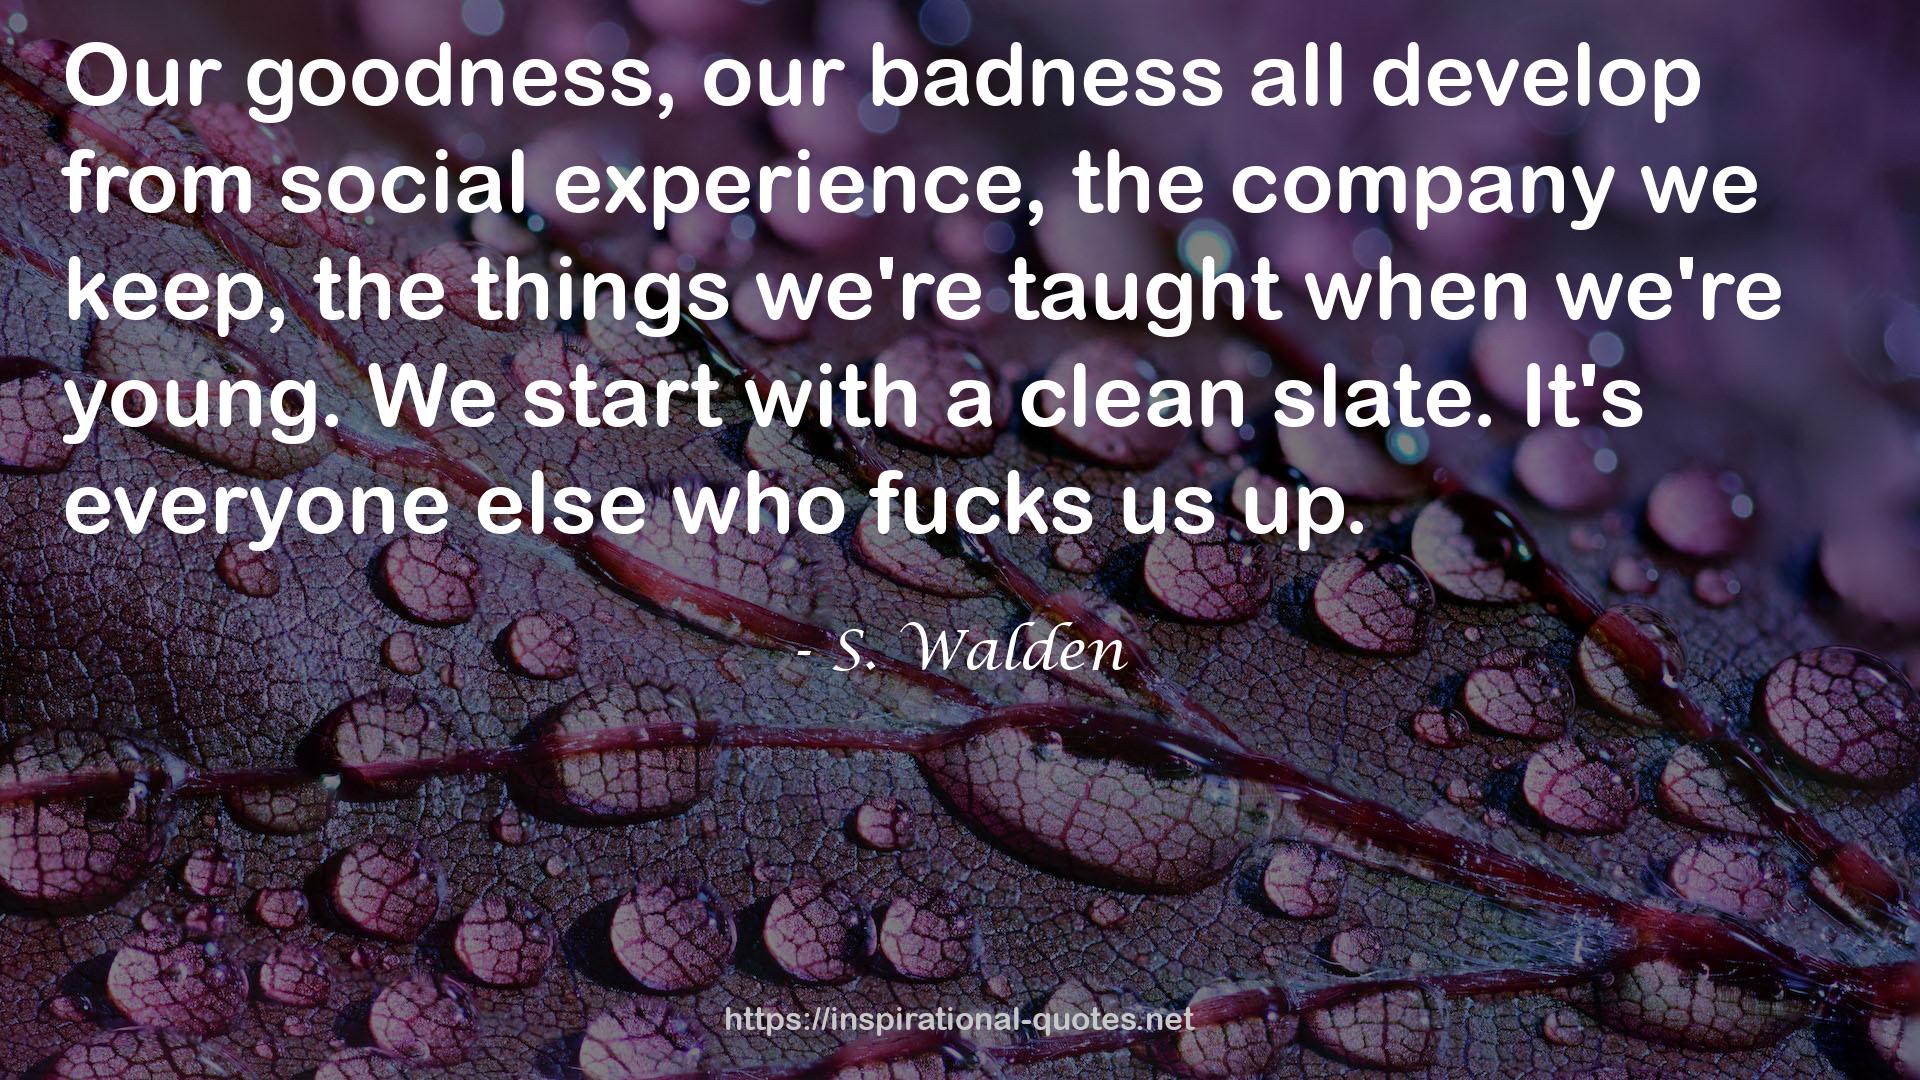 S. Walden QUOTES